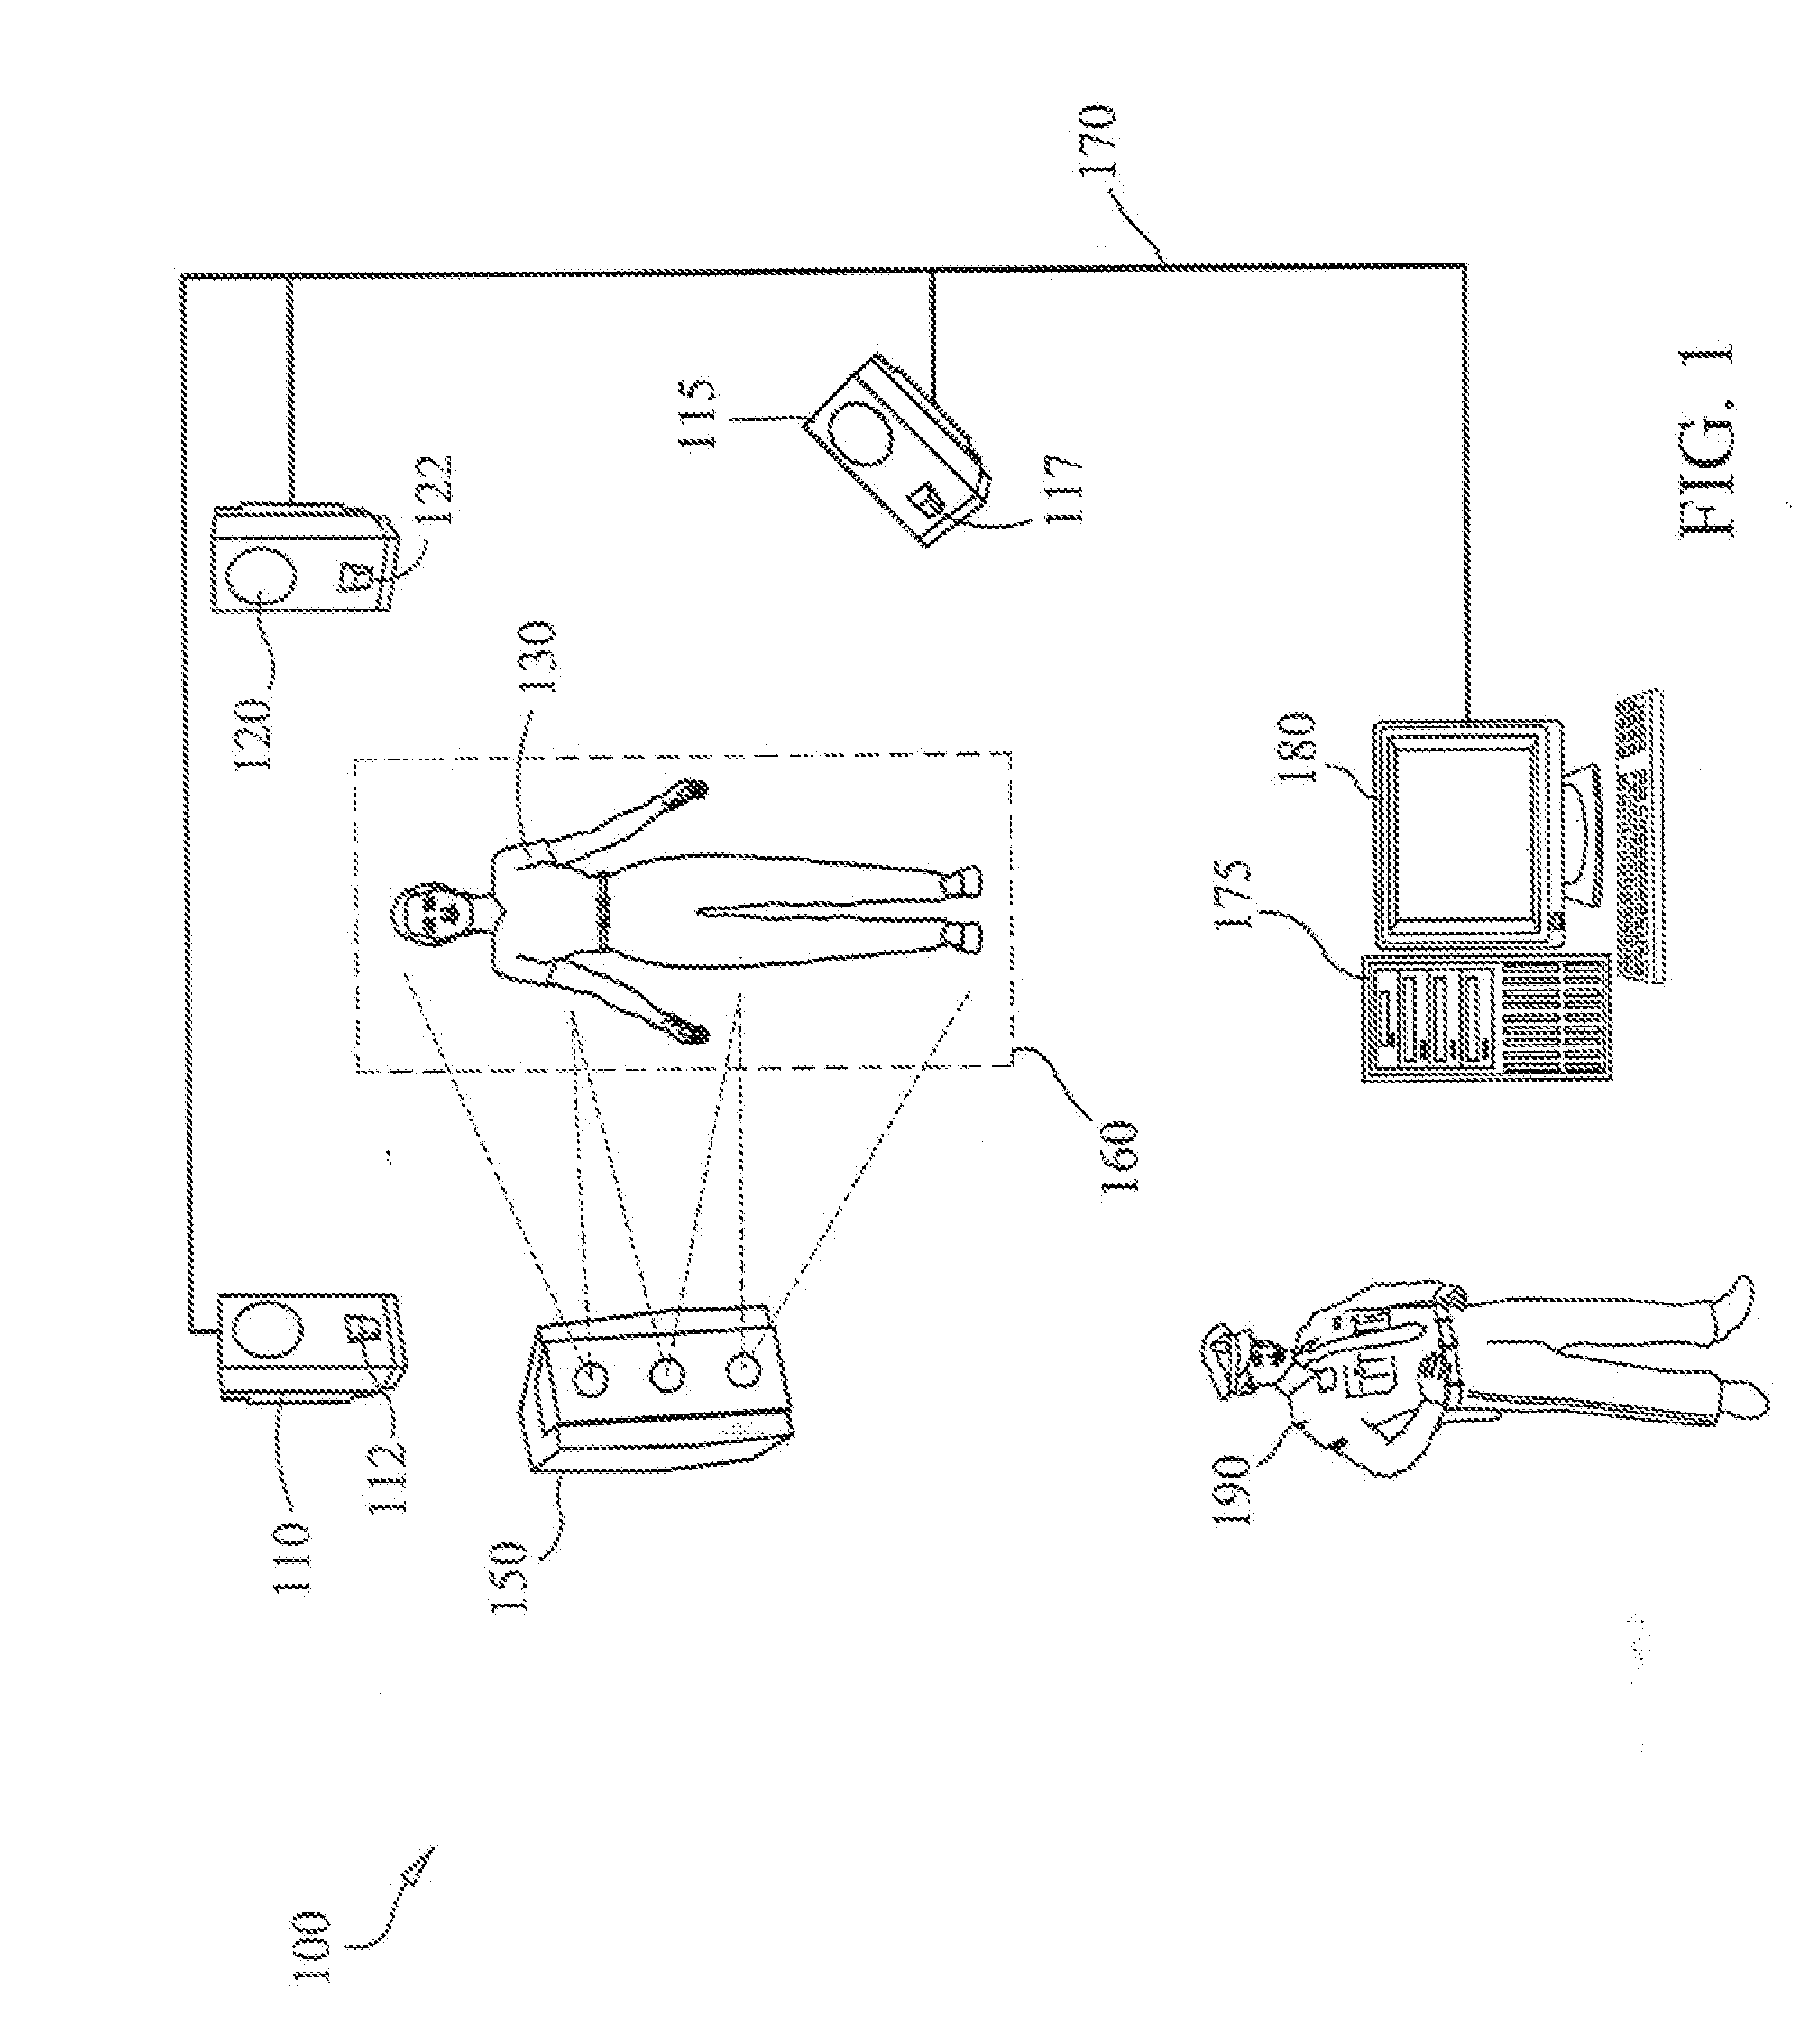 Multiple camera imaging method and system for detecting concealed objects